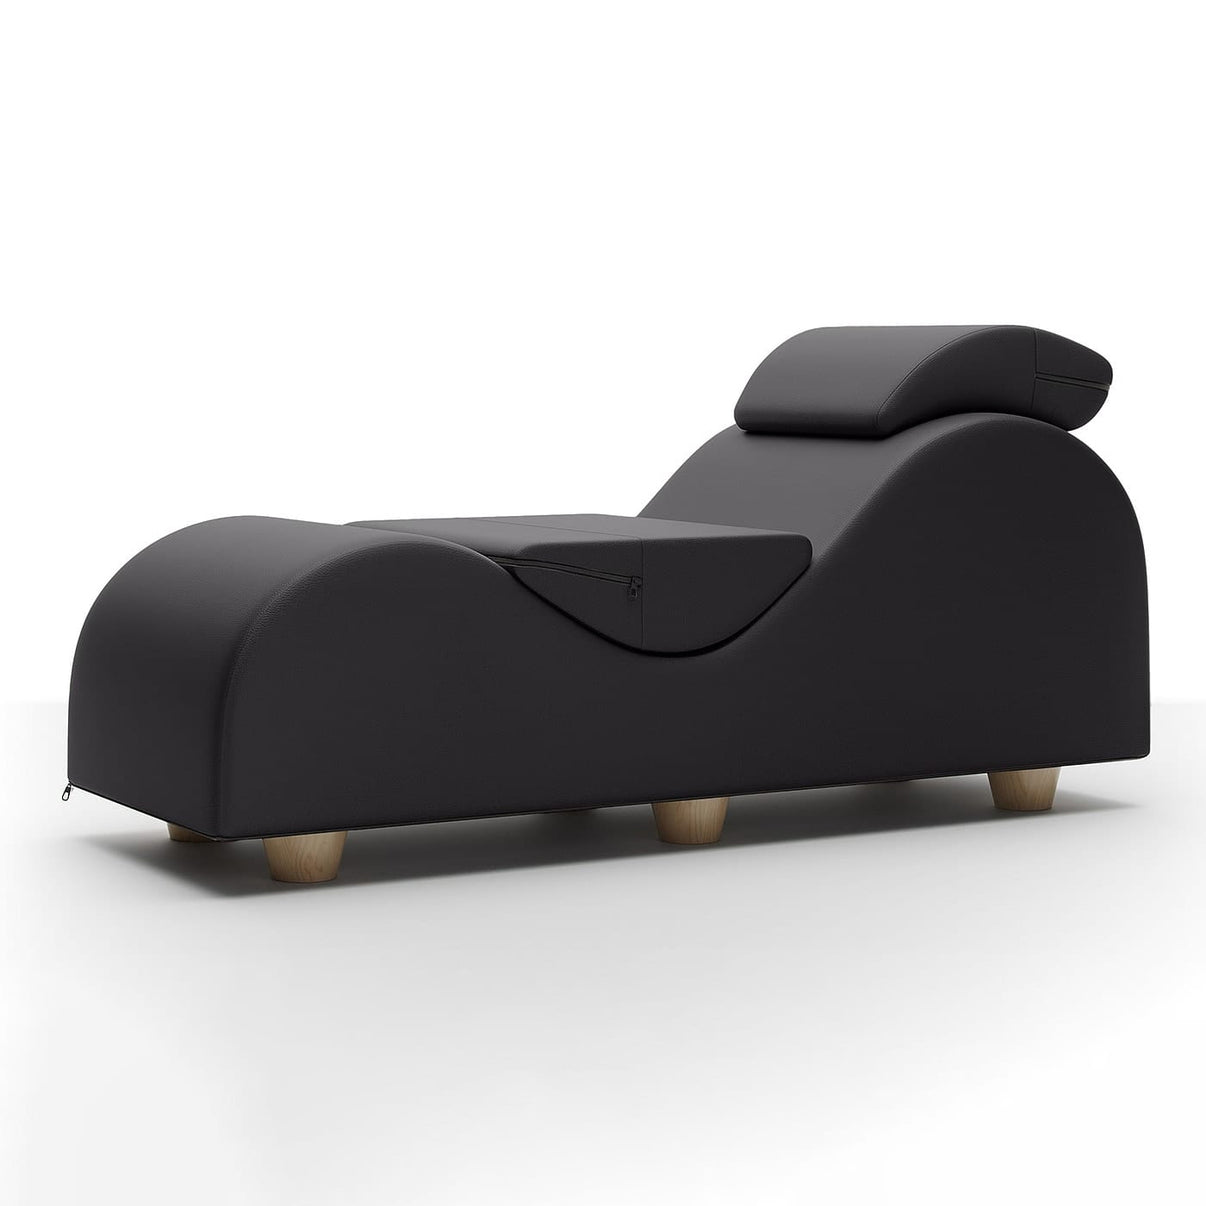 Liberator Esse Ii Sensual Lounge Chair Thorn And Feather 1266